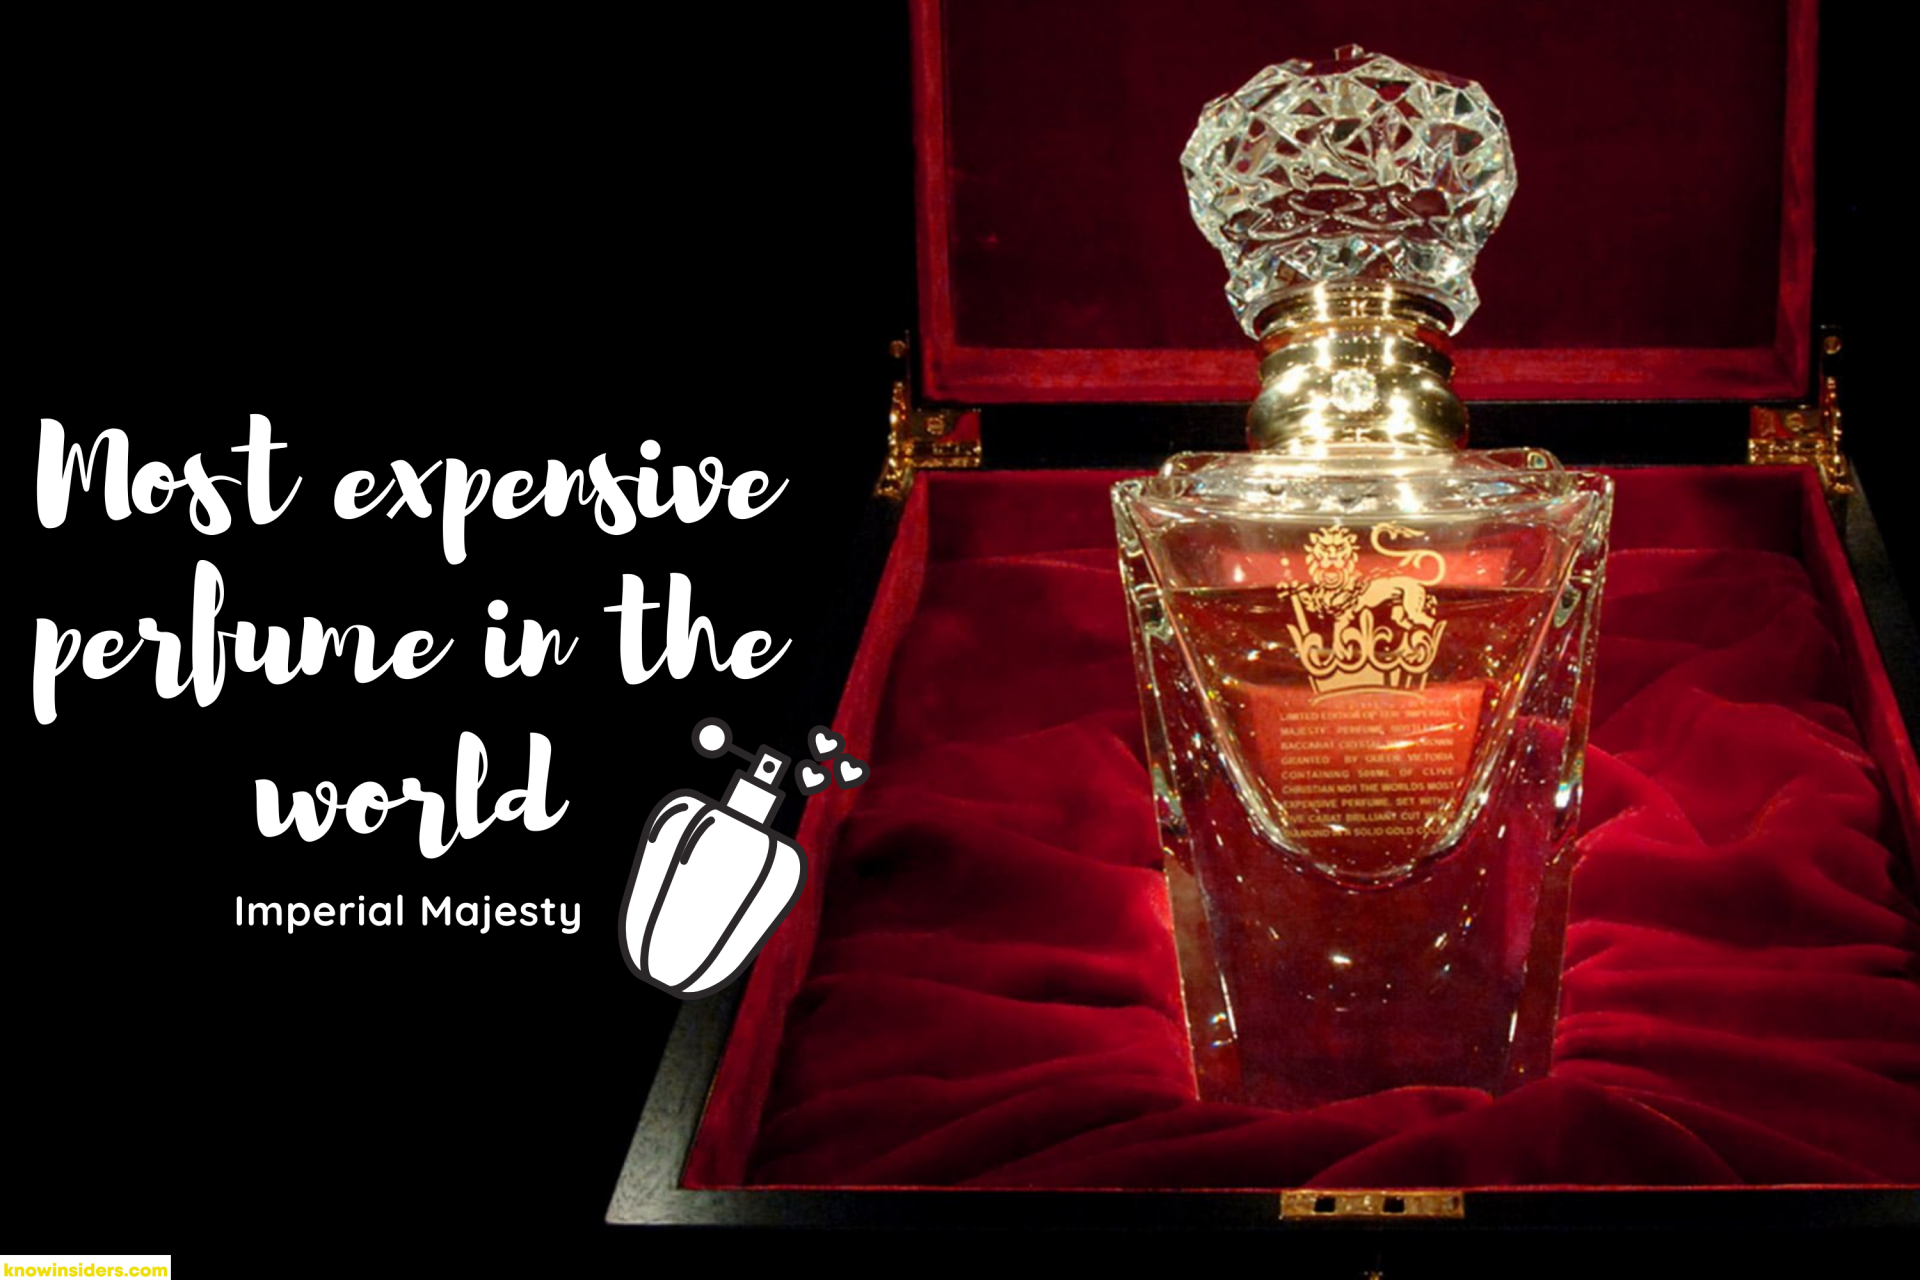 What is The Most Expensive Perfume in the World?